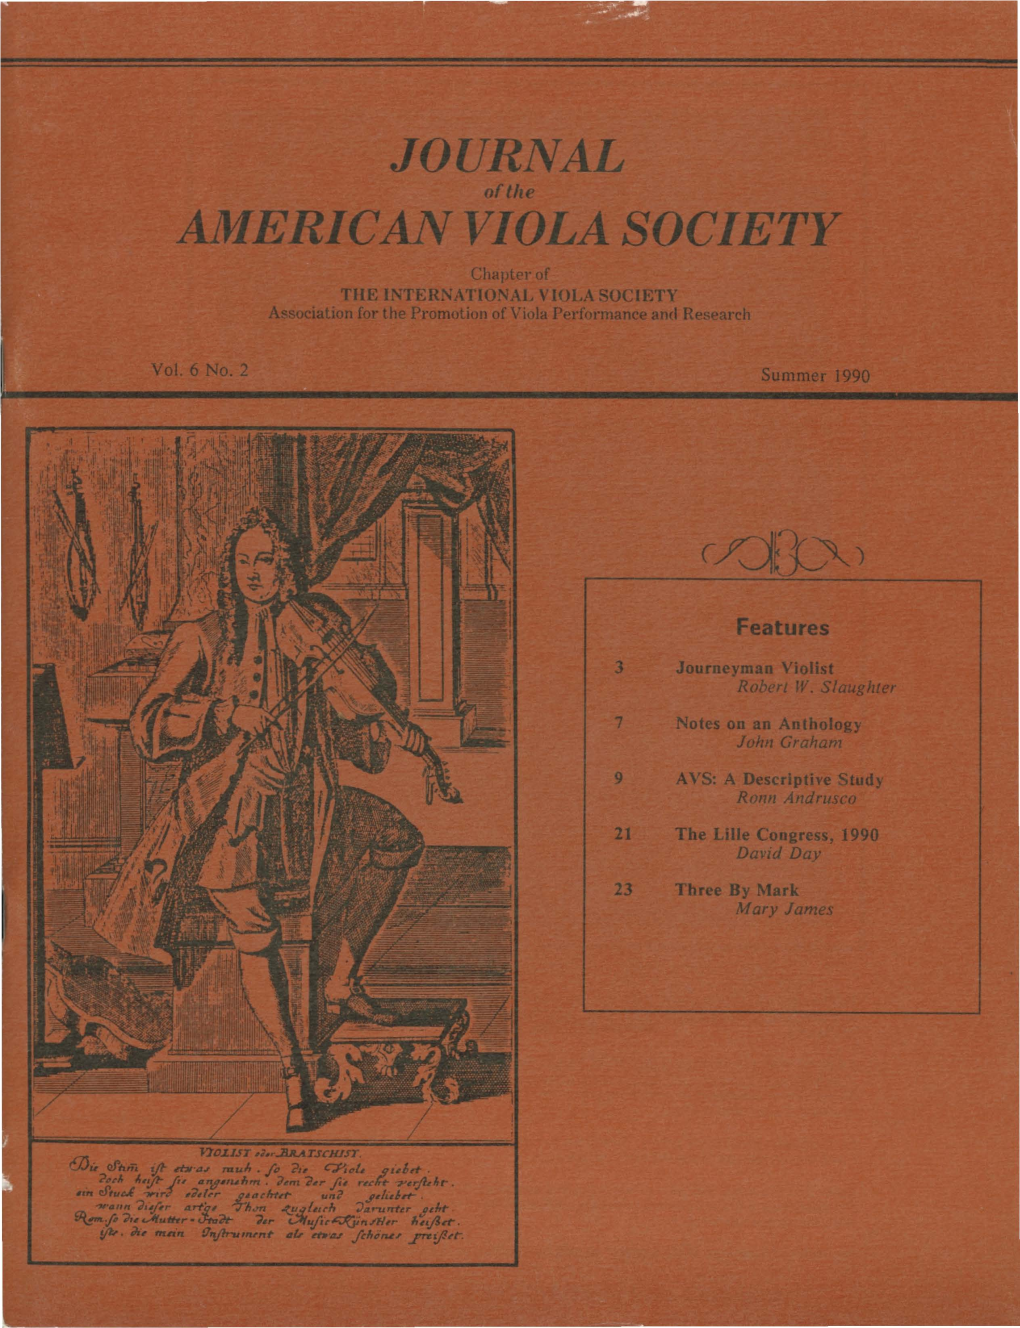 Journal of the American Viola Society Volume 6 No. 2, Summer 1990